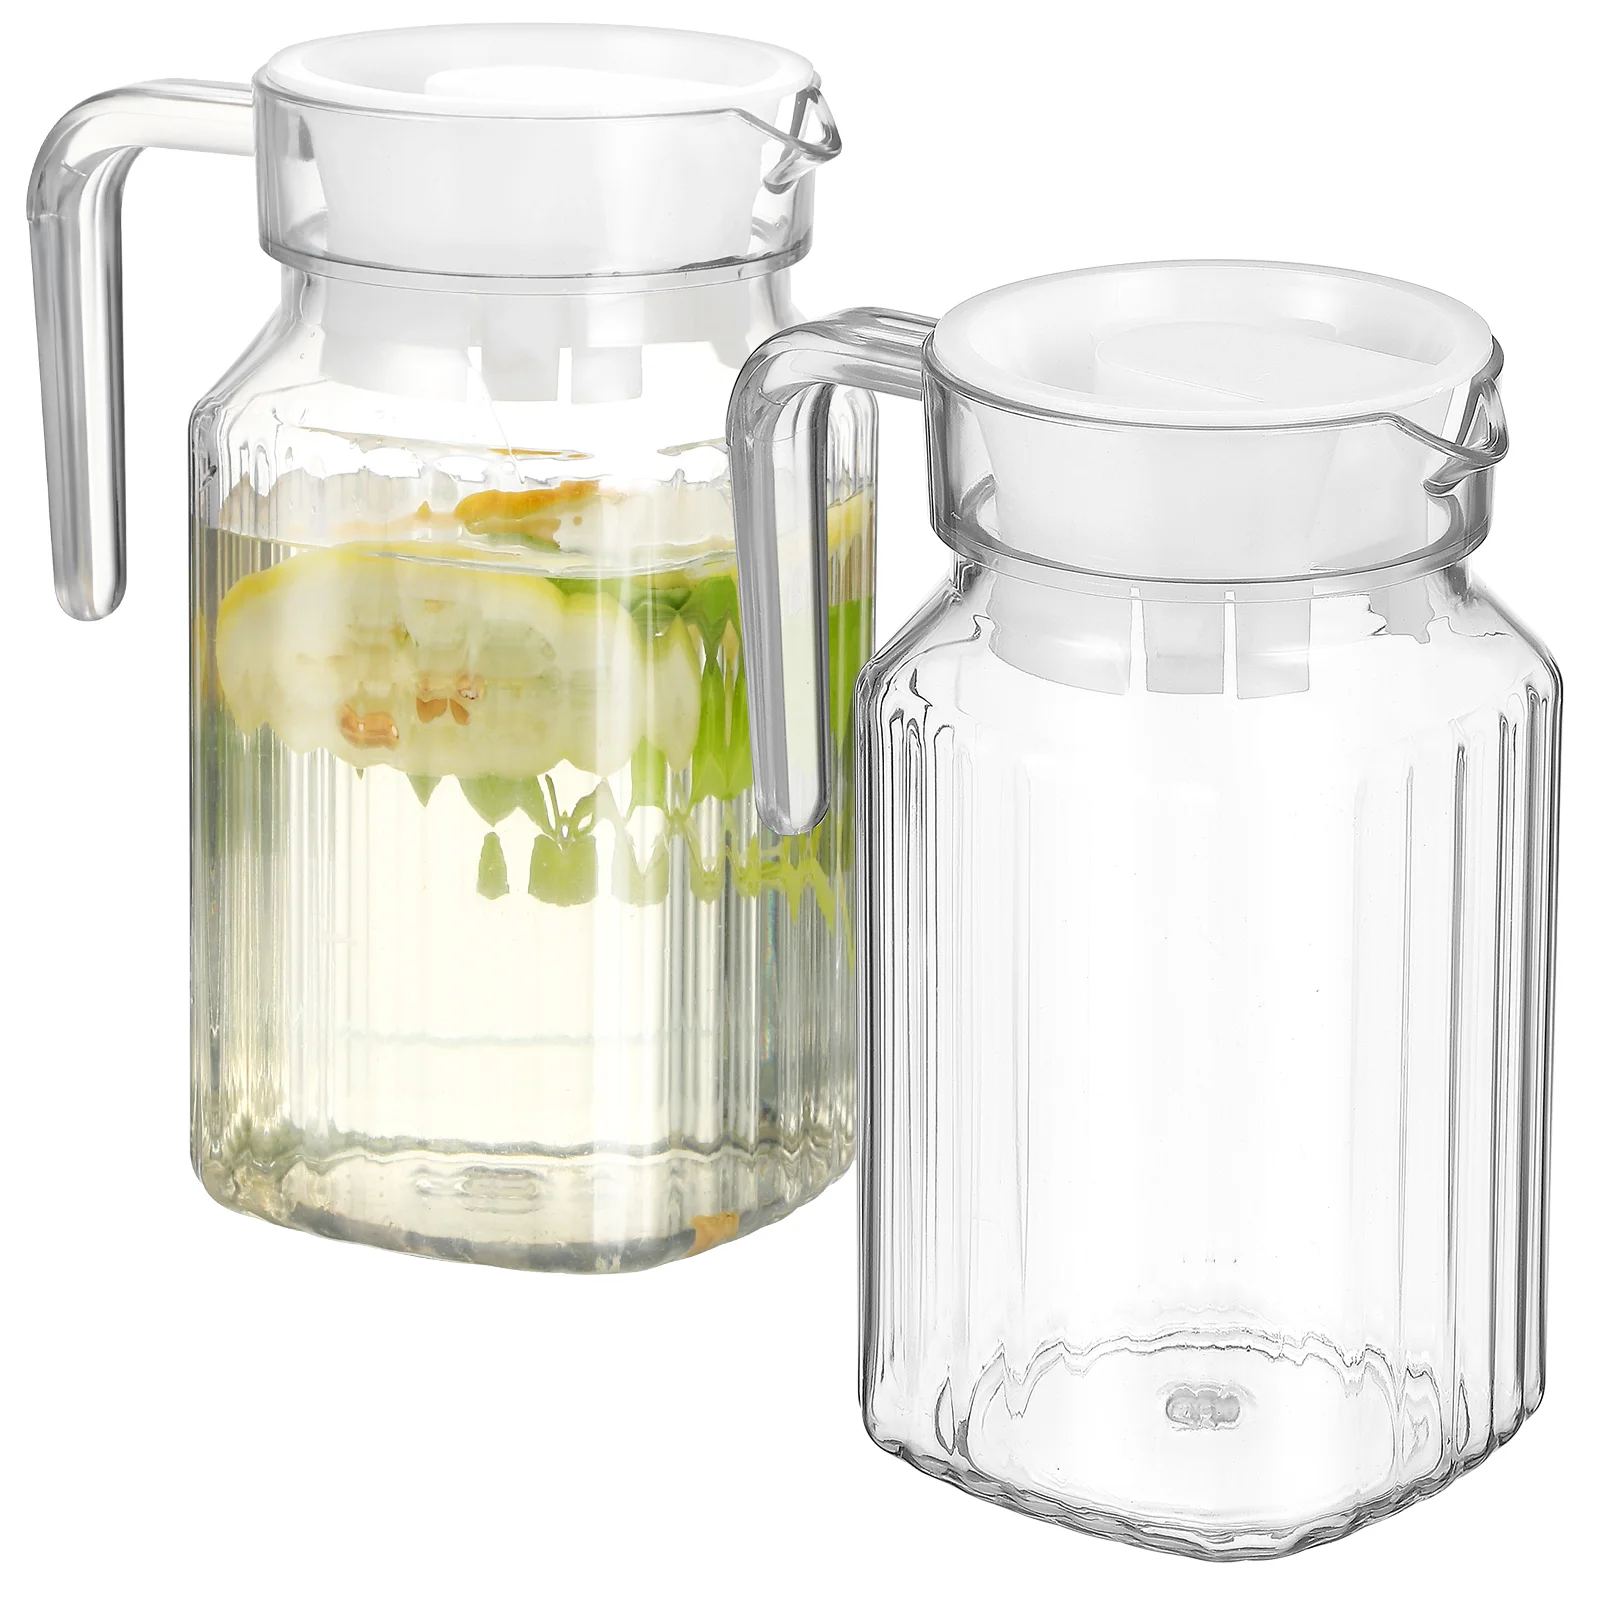 

2 Pcs Pitchers Large Capacity Water Jugs Pots with Lids for Tea Drinks Hot Cold Water